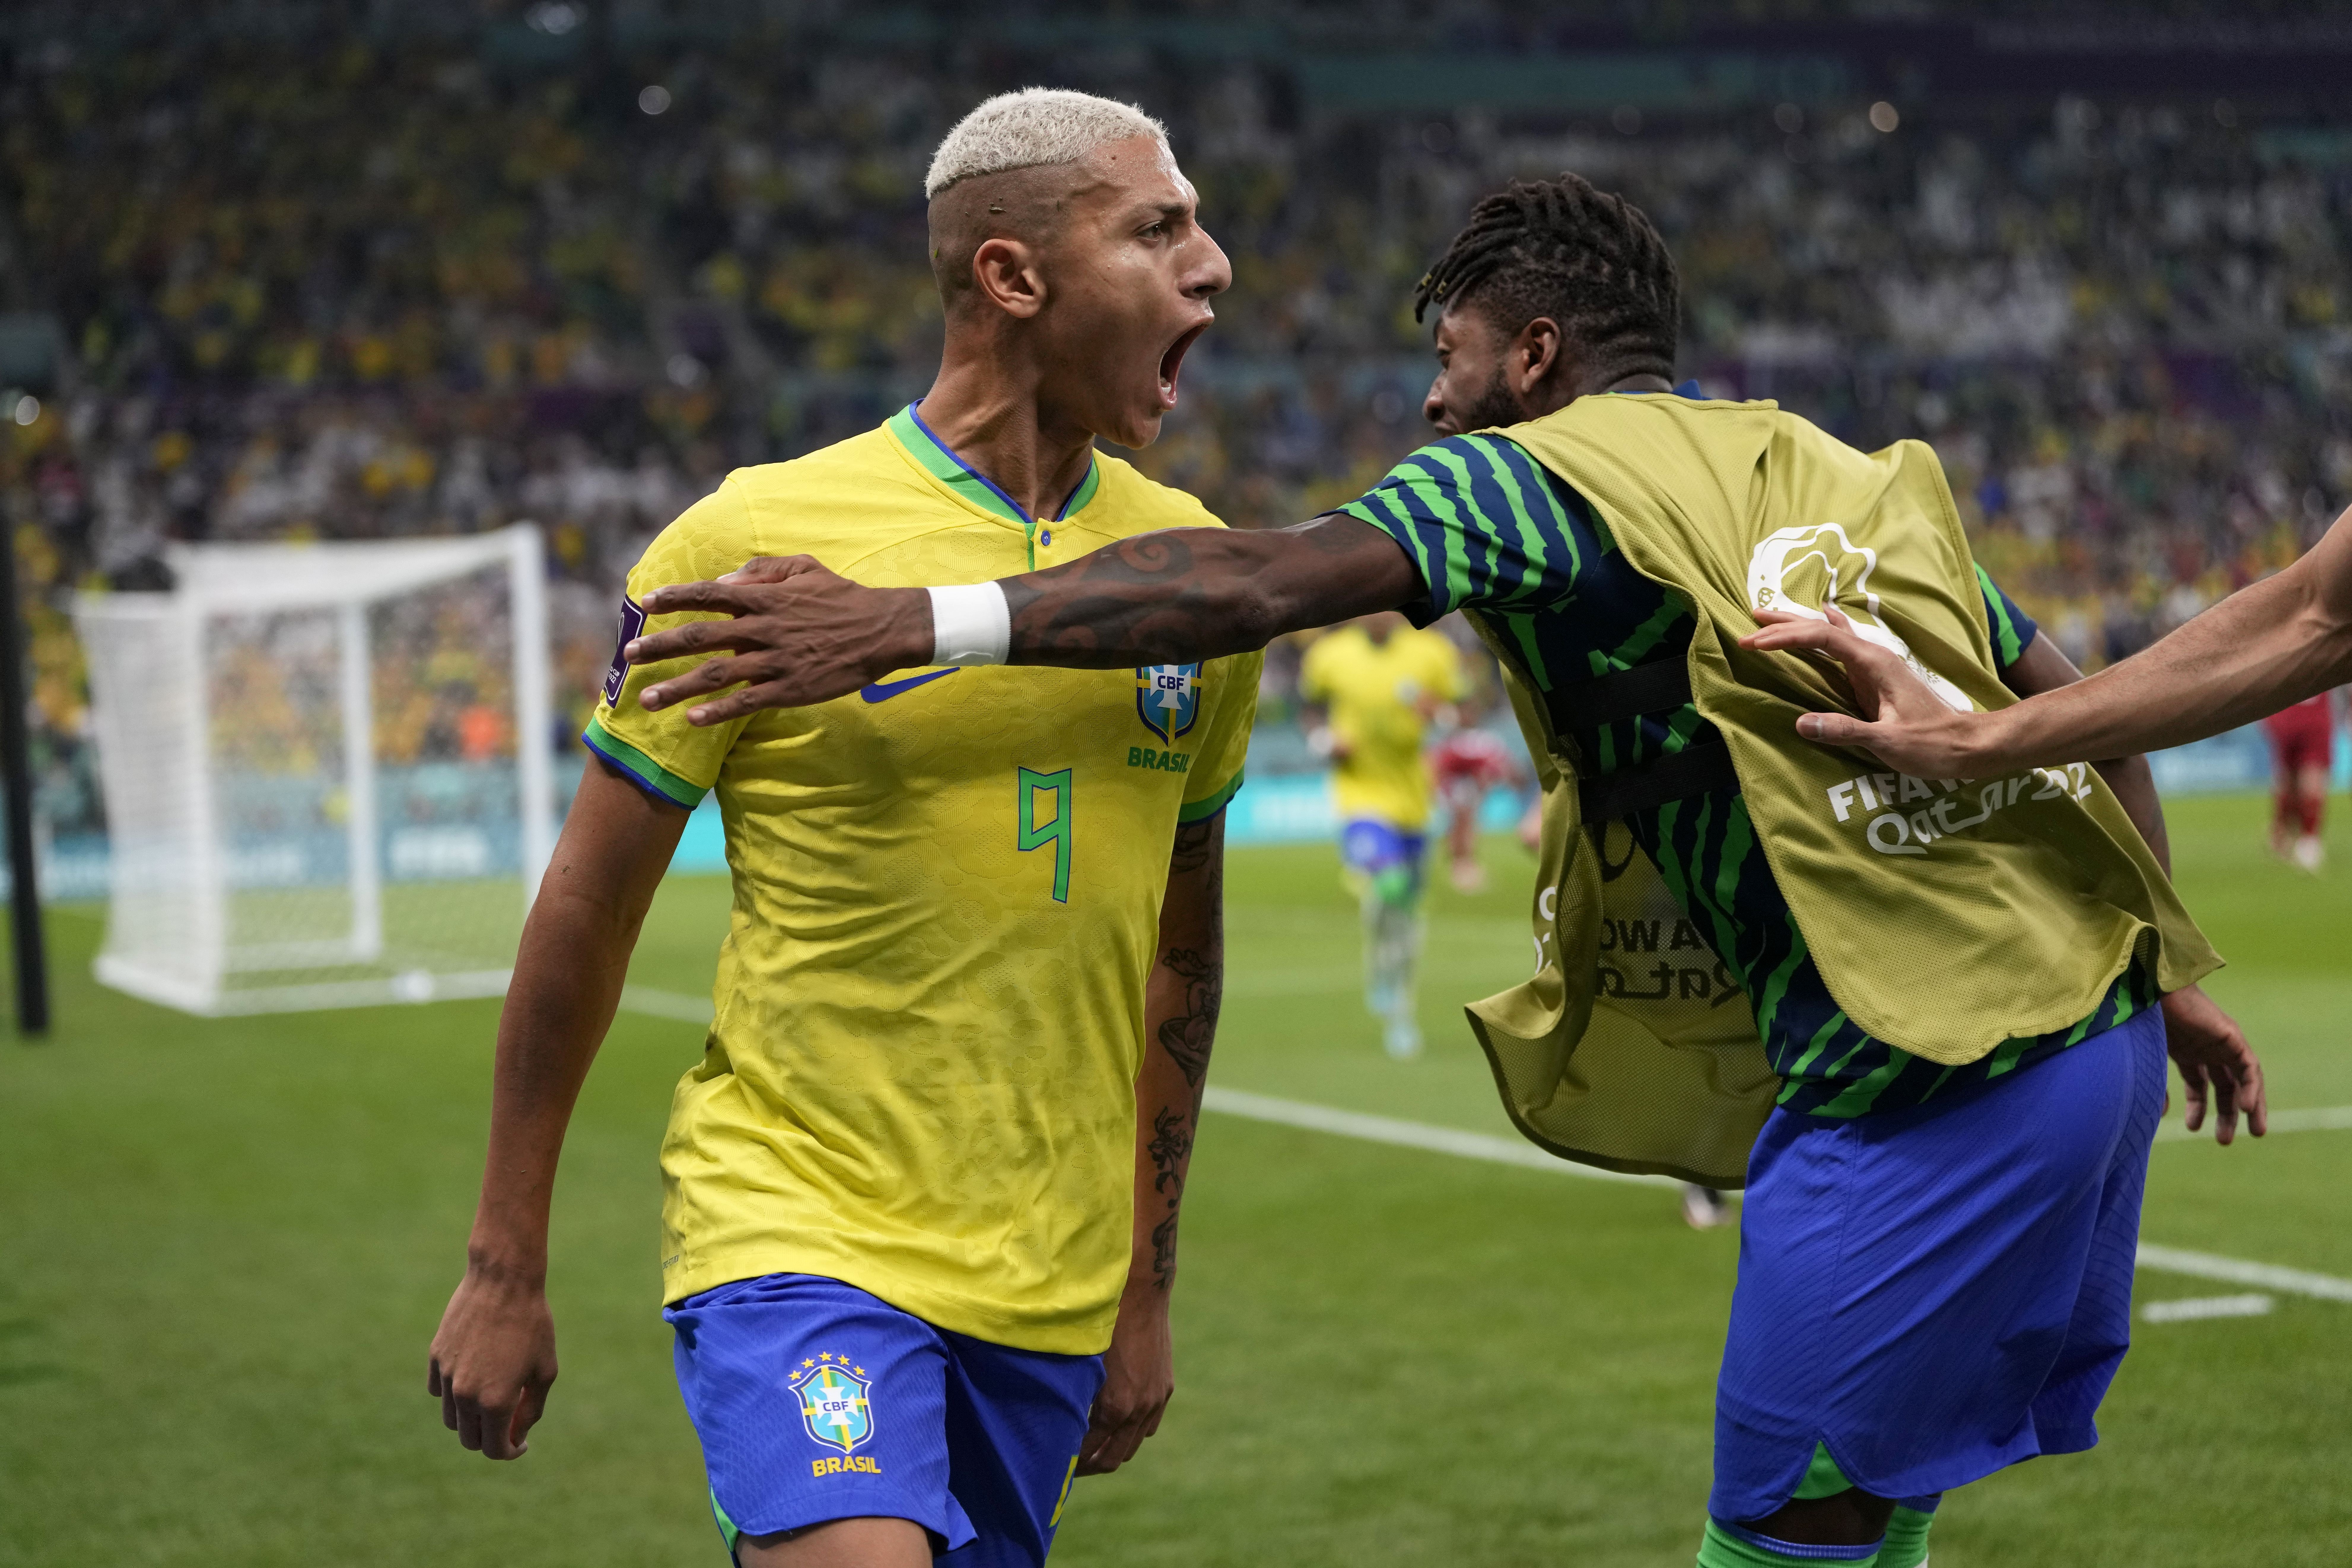 Fifa World Cup 2022 Brazil live up to favourites tag with victory over Serbia